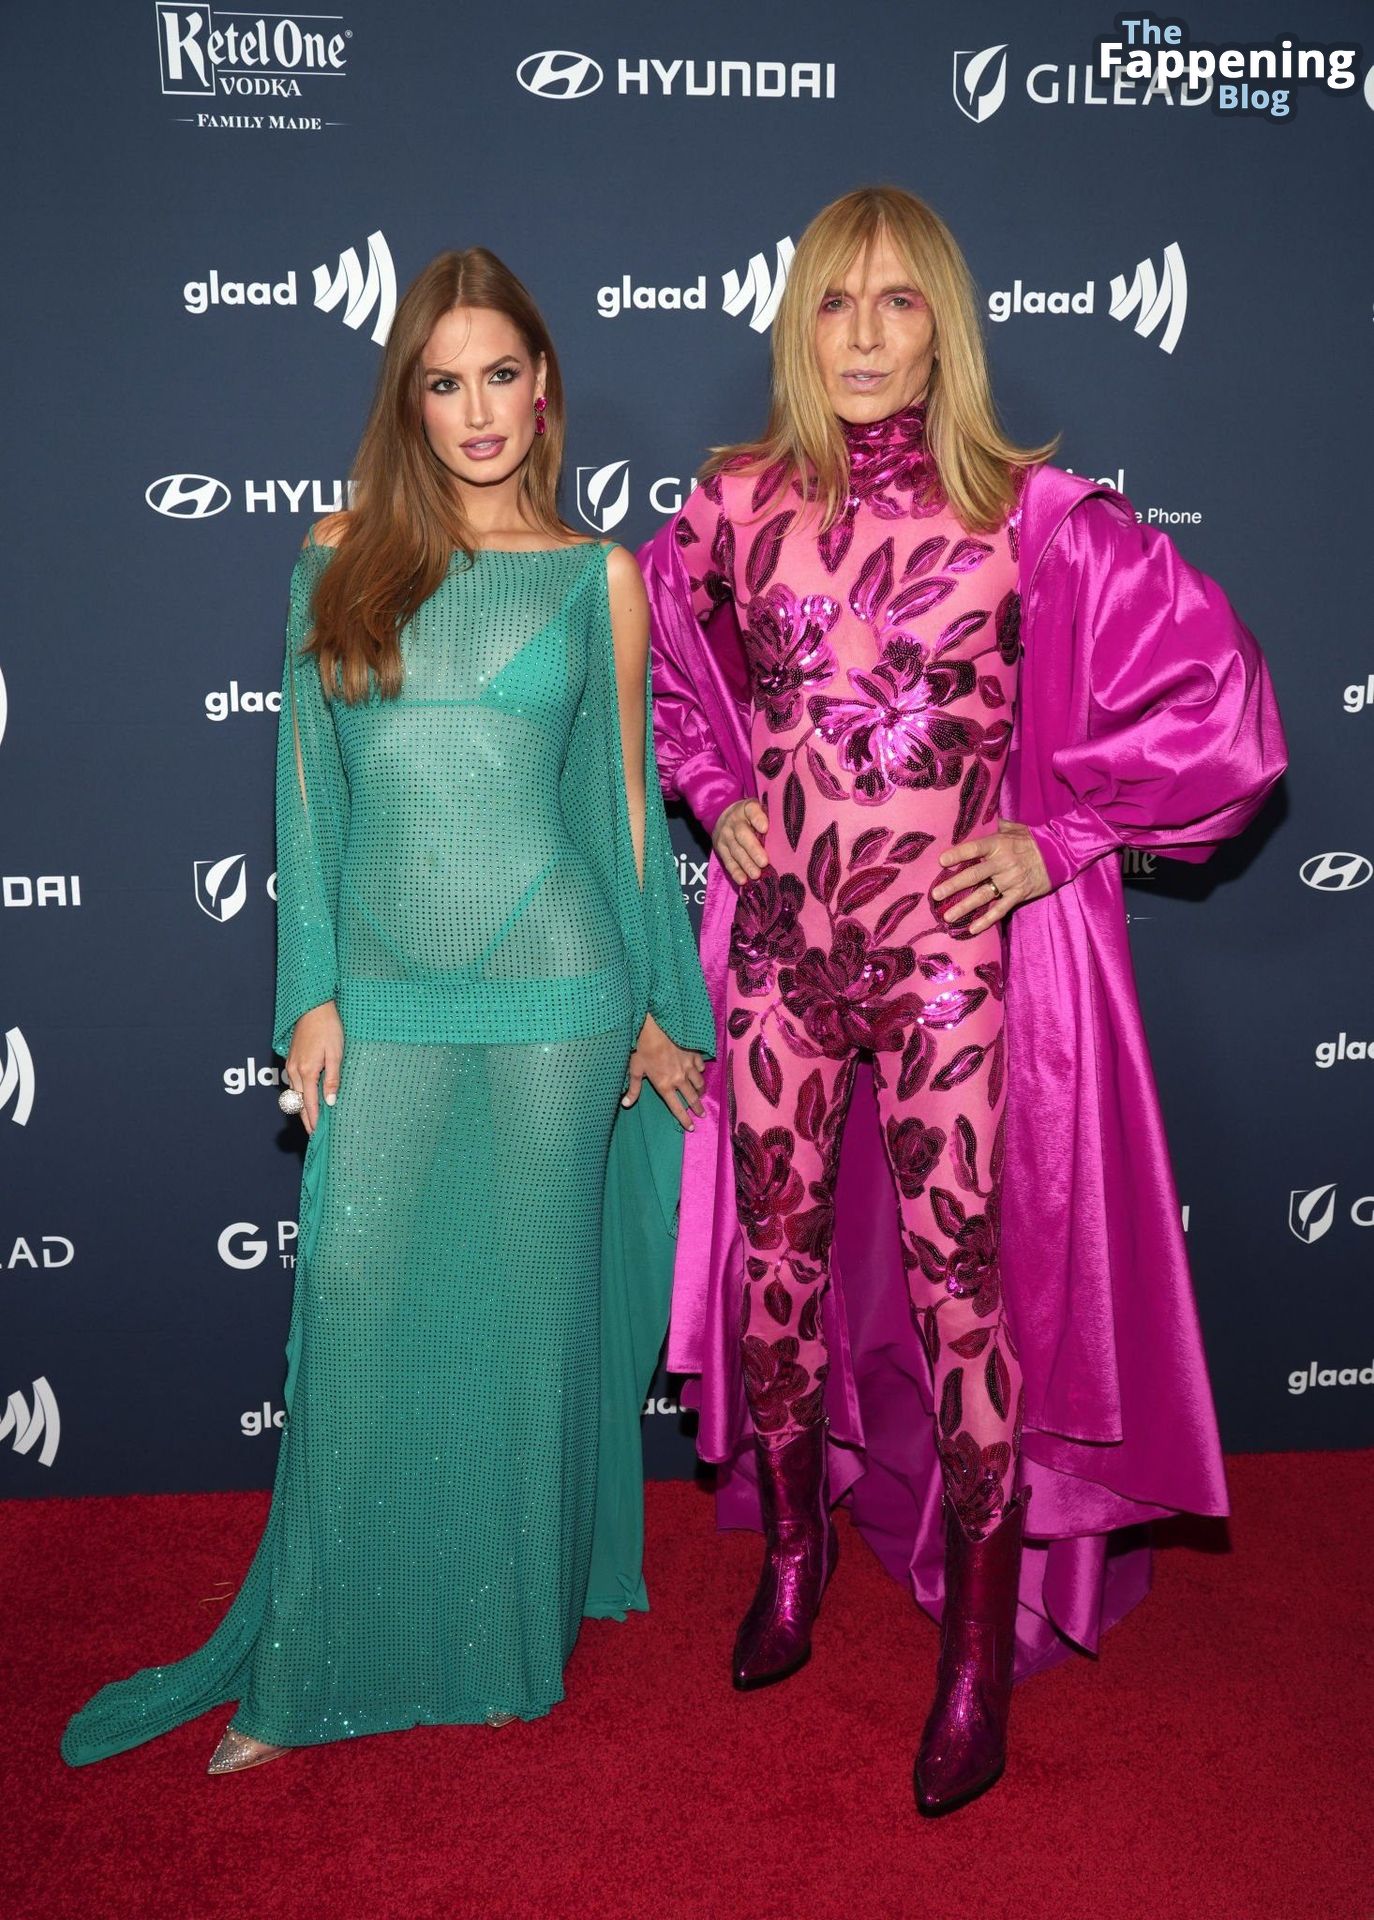 Haley Kalil Displays Her Sexy Figure in See-Through Dress at the 34th Annual GLAAD Media Awards in NYC (15 Photos)